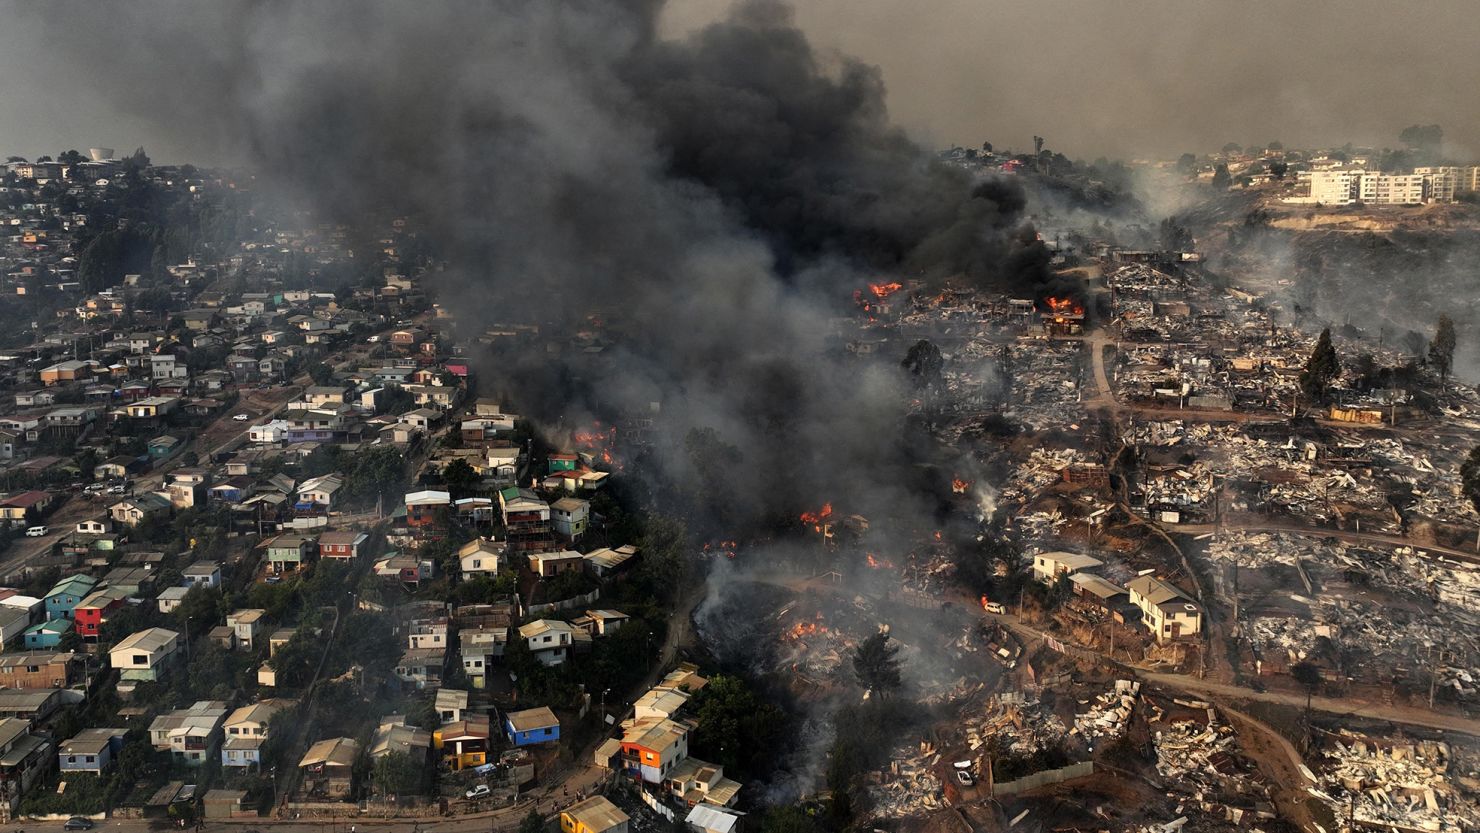 A wildfire reduces homes to rubble and ash on the hills of Viña del Mar, Chile, on February 3.